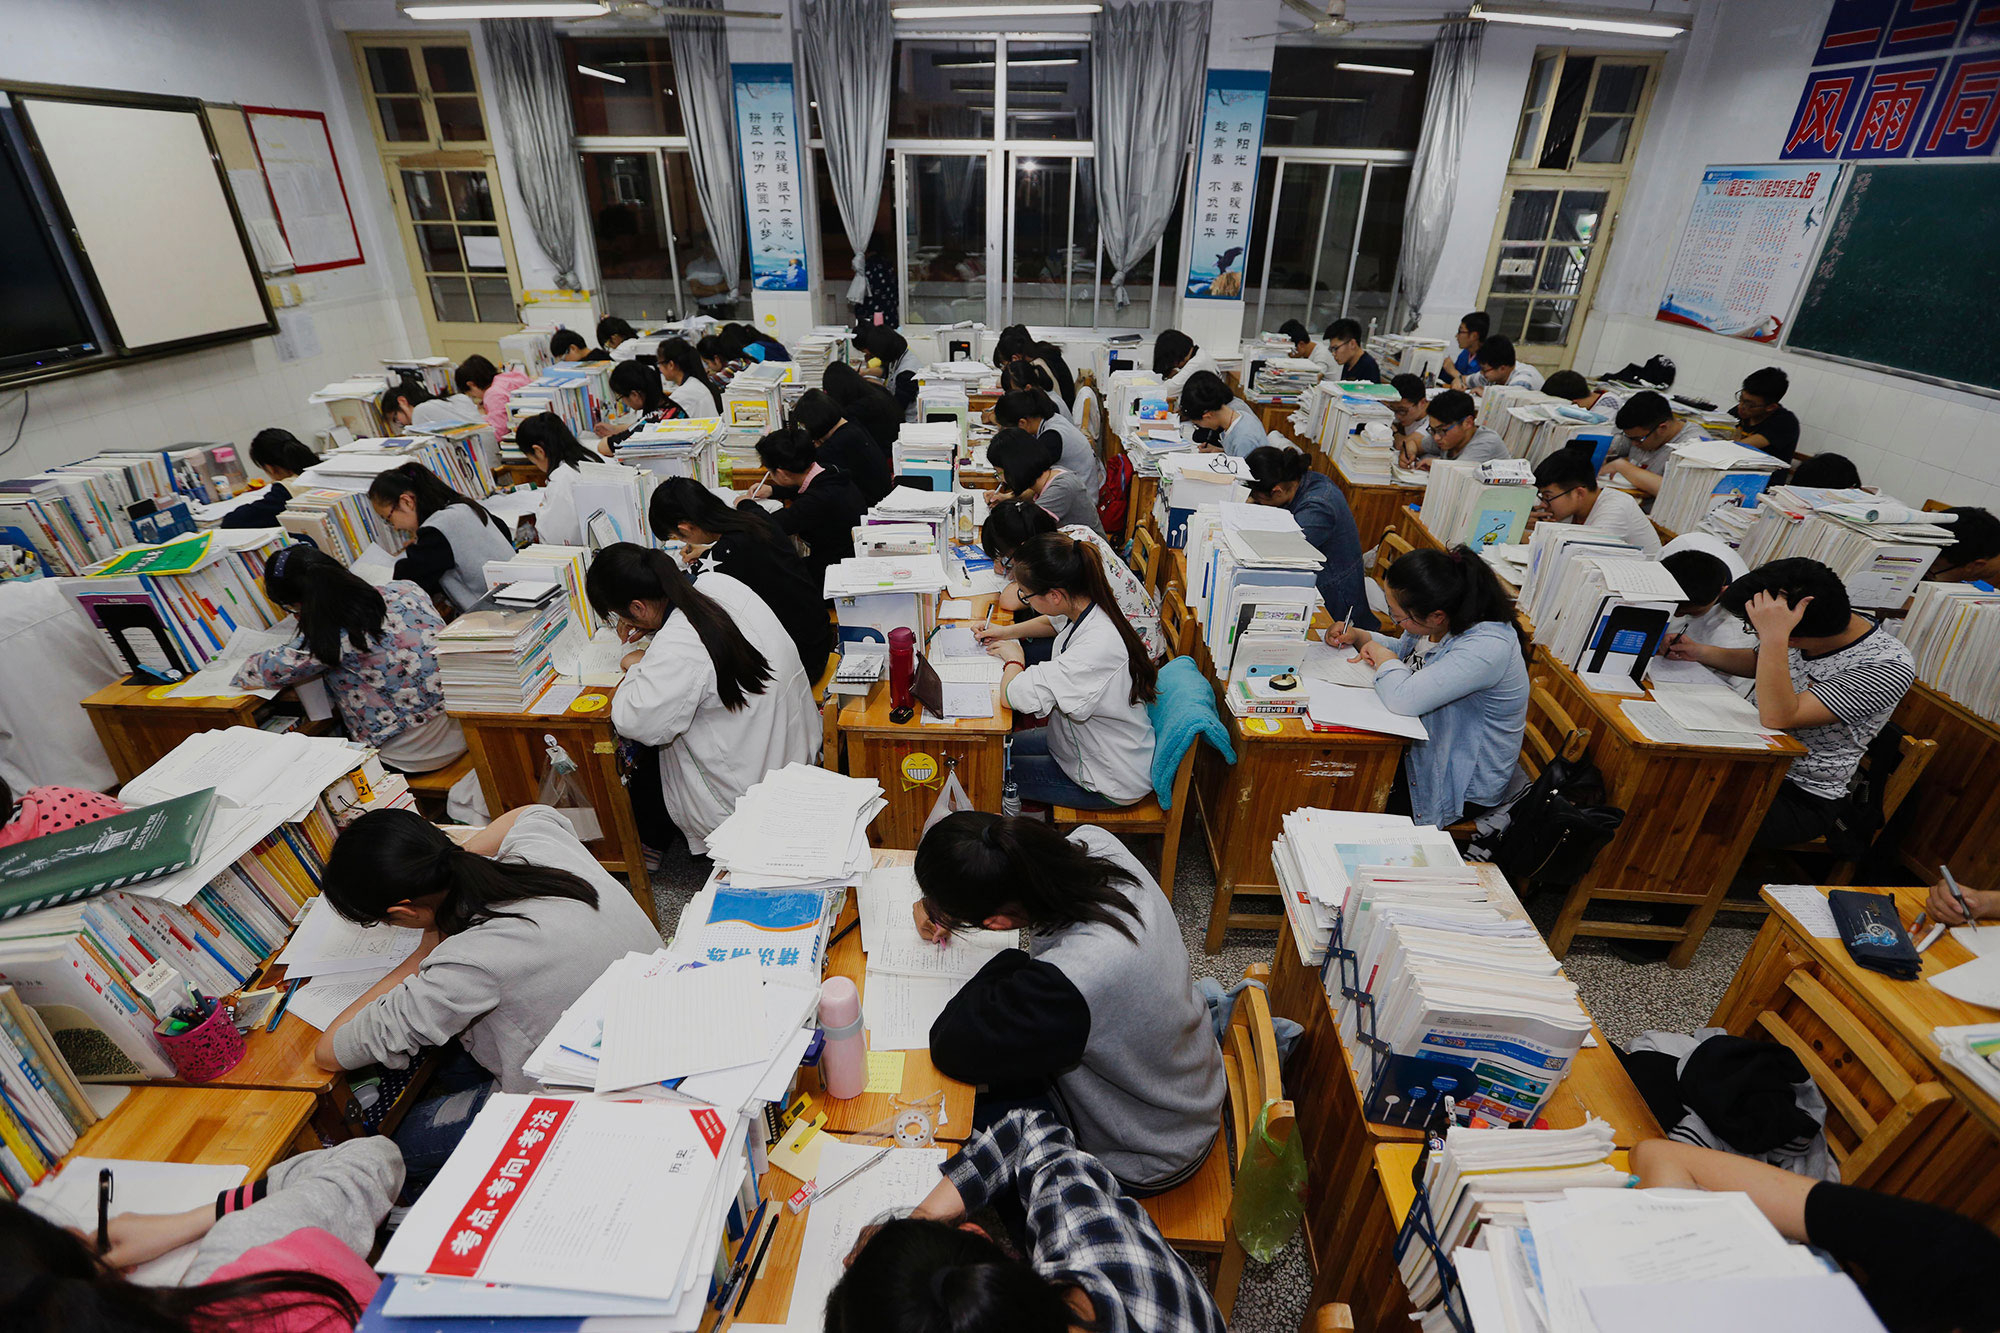 Is there good education in China?